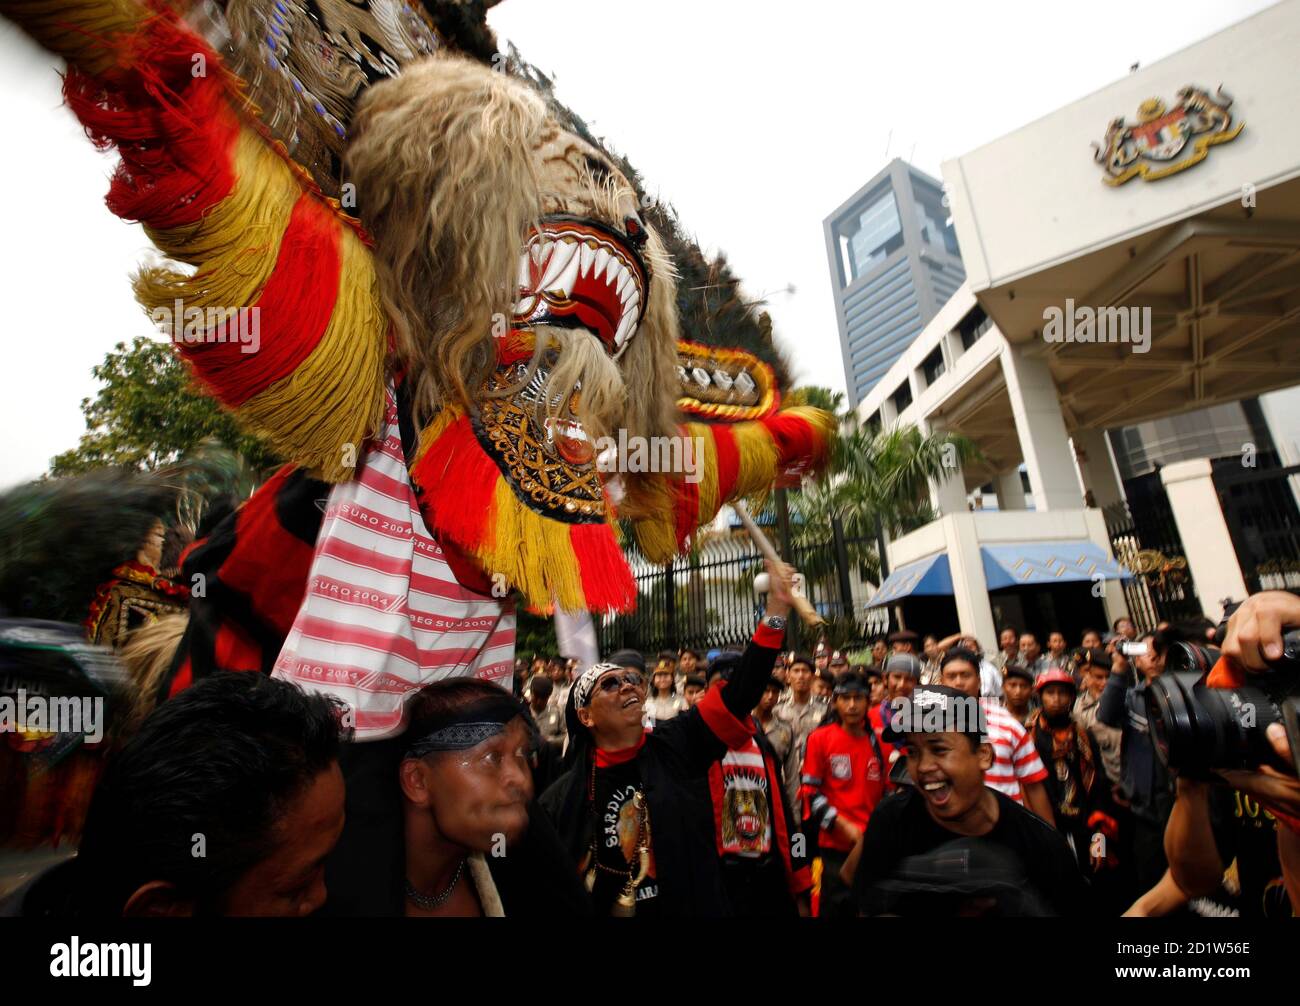 A Reog Ponorogo dancer performs during a protest outside Malaysia's embassy in Jakarta November 29, 2007. Hundreds of Indonesian Reog Ponorogo dancers held a colourful protest outside the Malaysian embassy as a new dispute erupted between the two neighbours over cultural heritage. REUTERS/Beawiharta (INDONESIA) Stock Photo